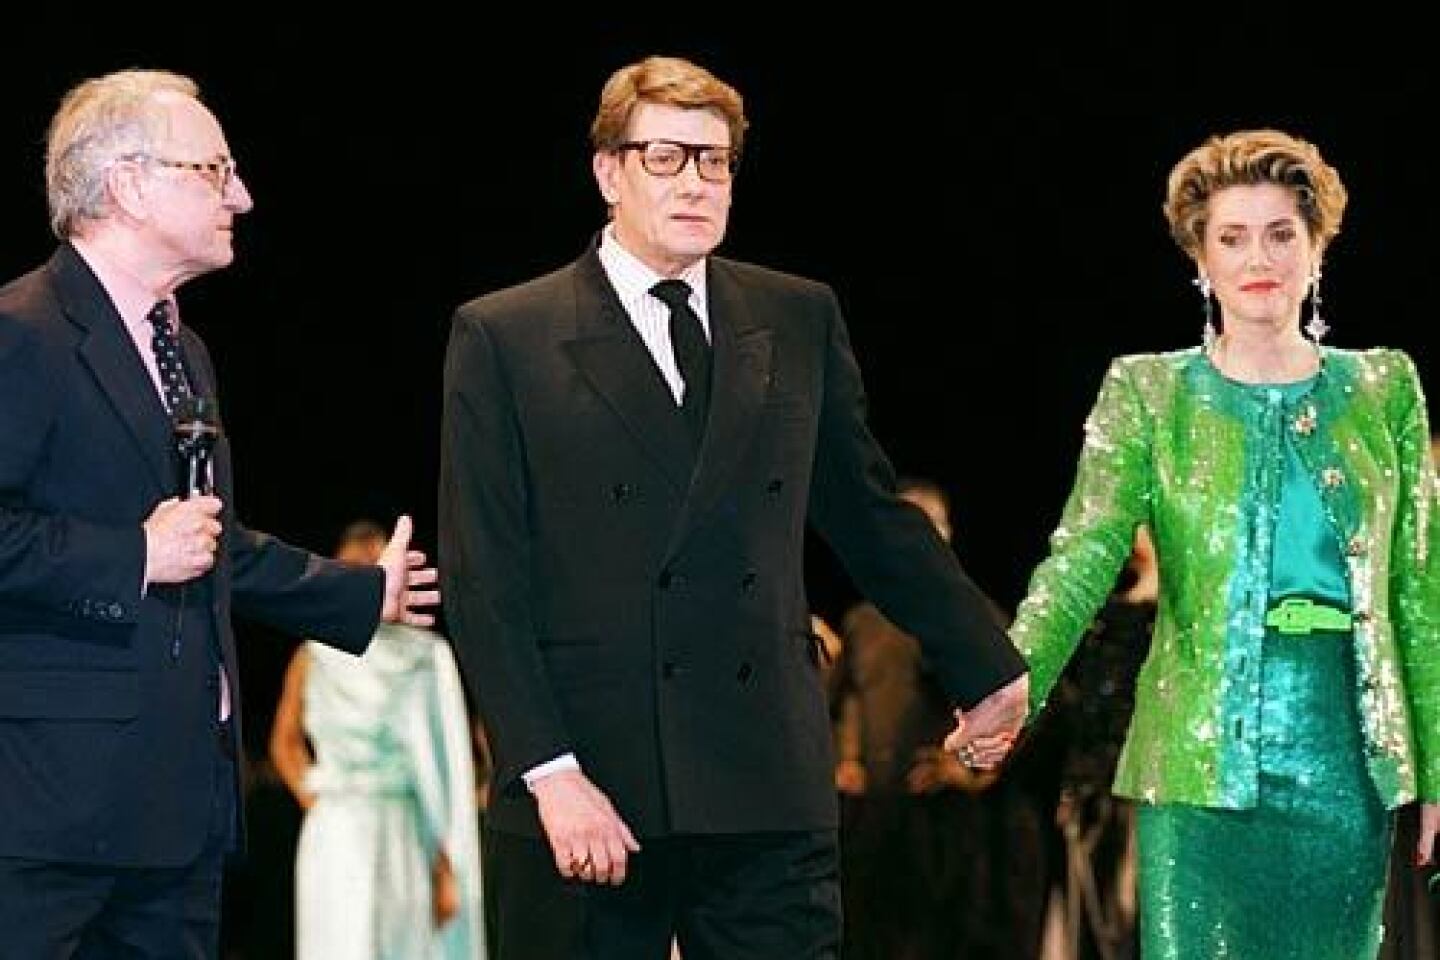 Yves Saint Laurent, 71; icon of French fashion design - Los